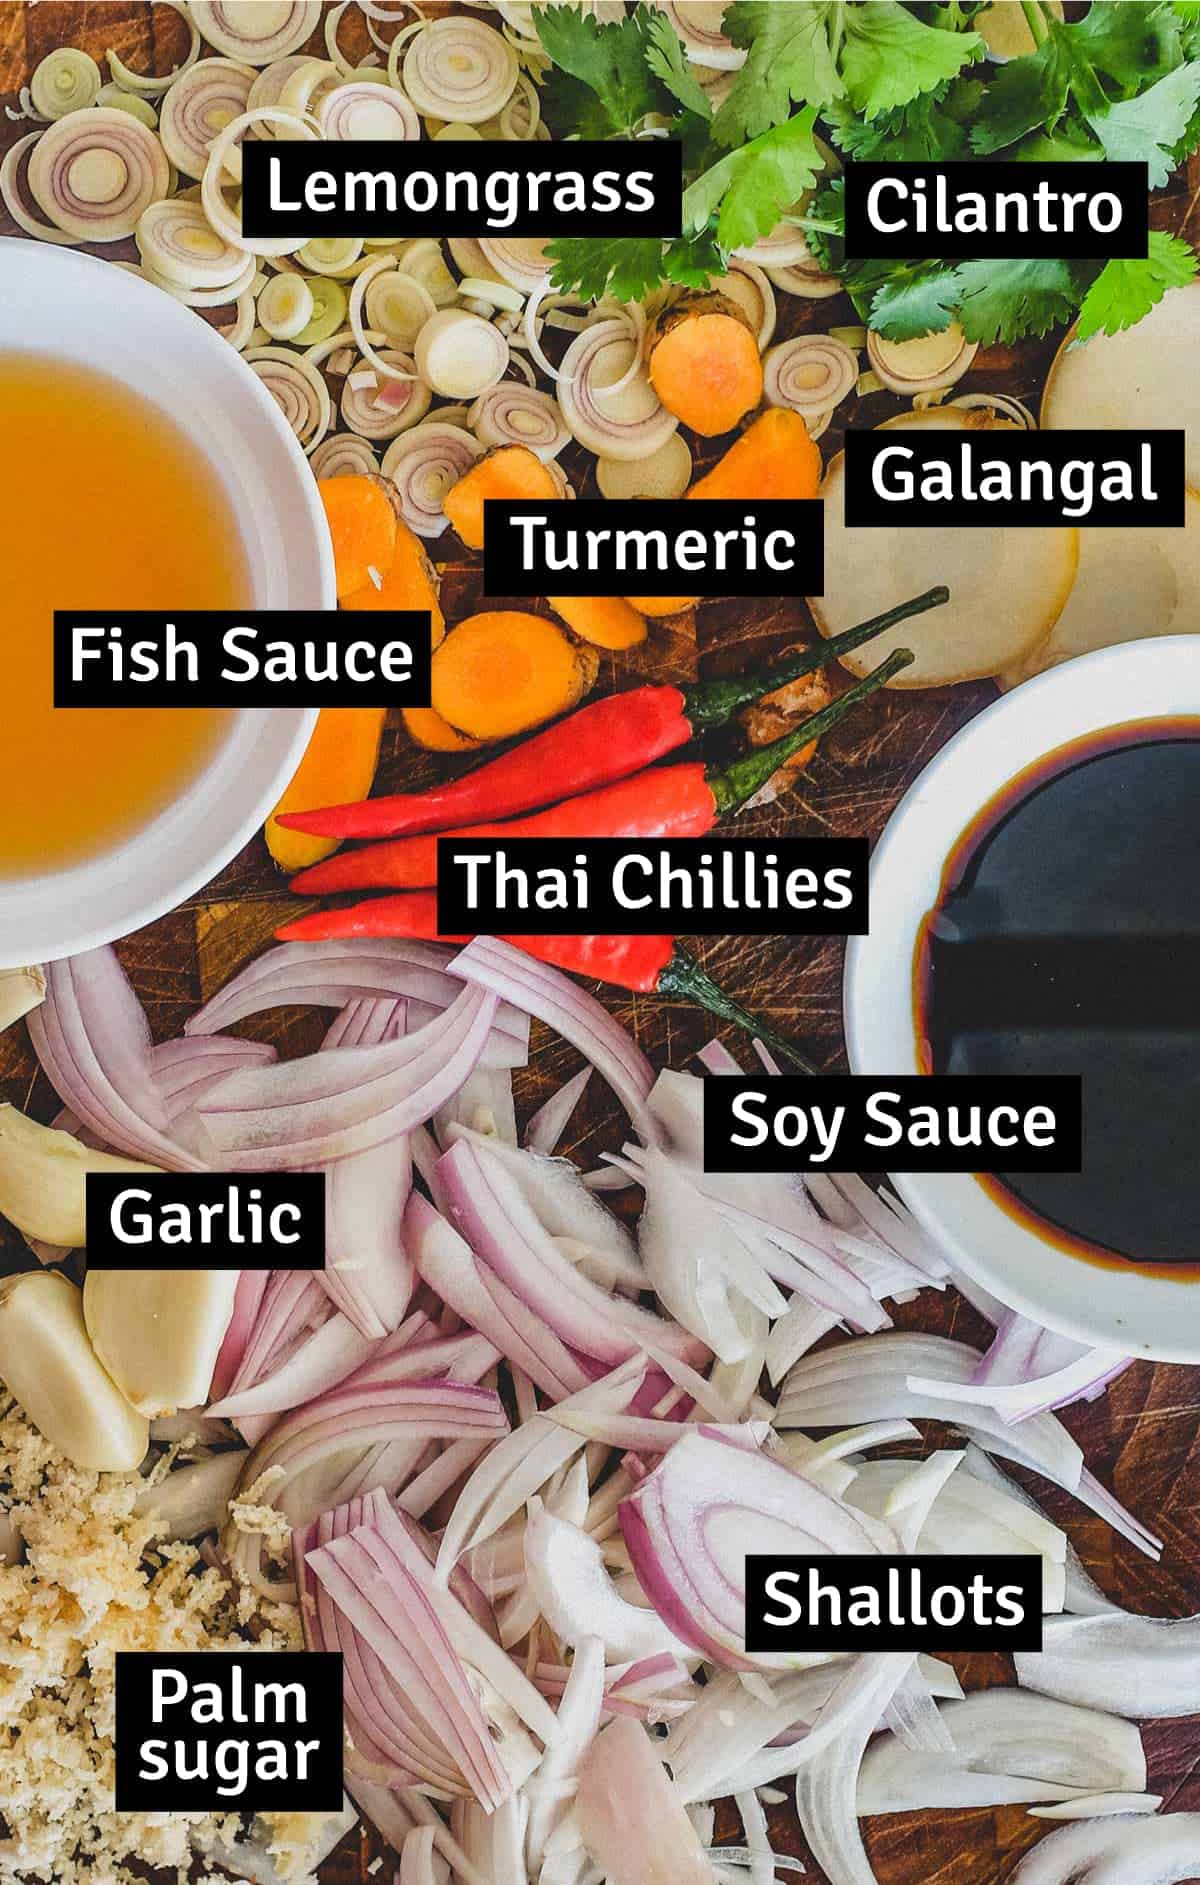 The ingredients for Thai-Style Grilled Chicken (Gai Yang) including Lemongrass, galangal, fish sauce and palm sugar.